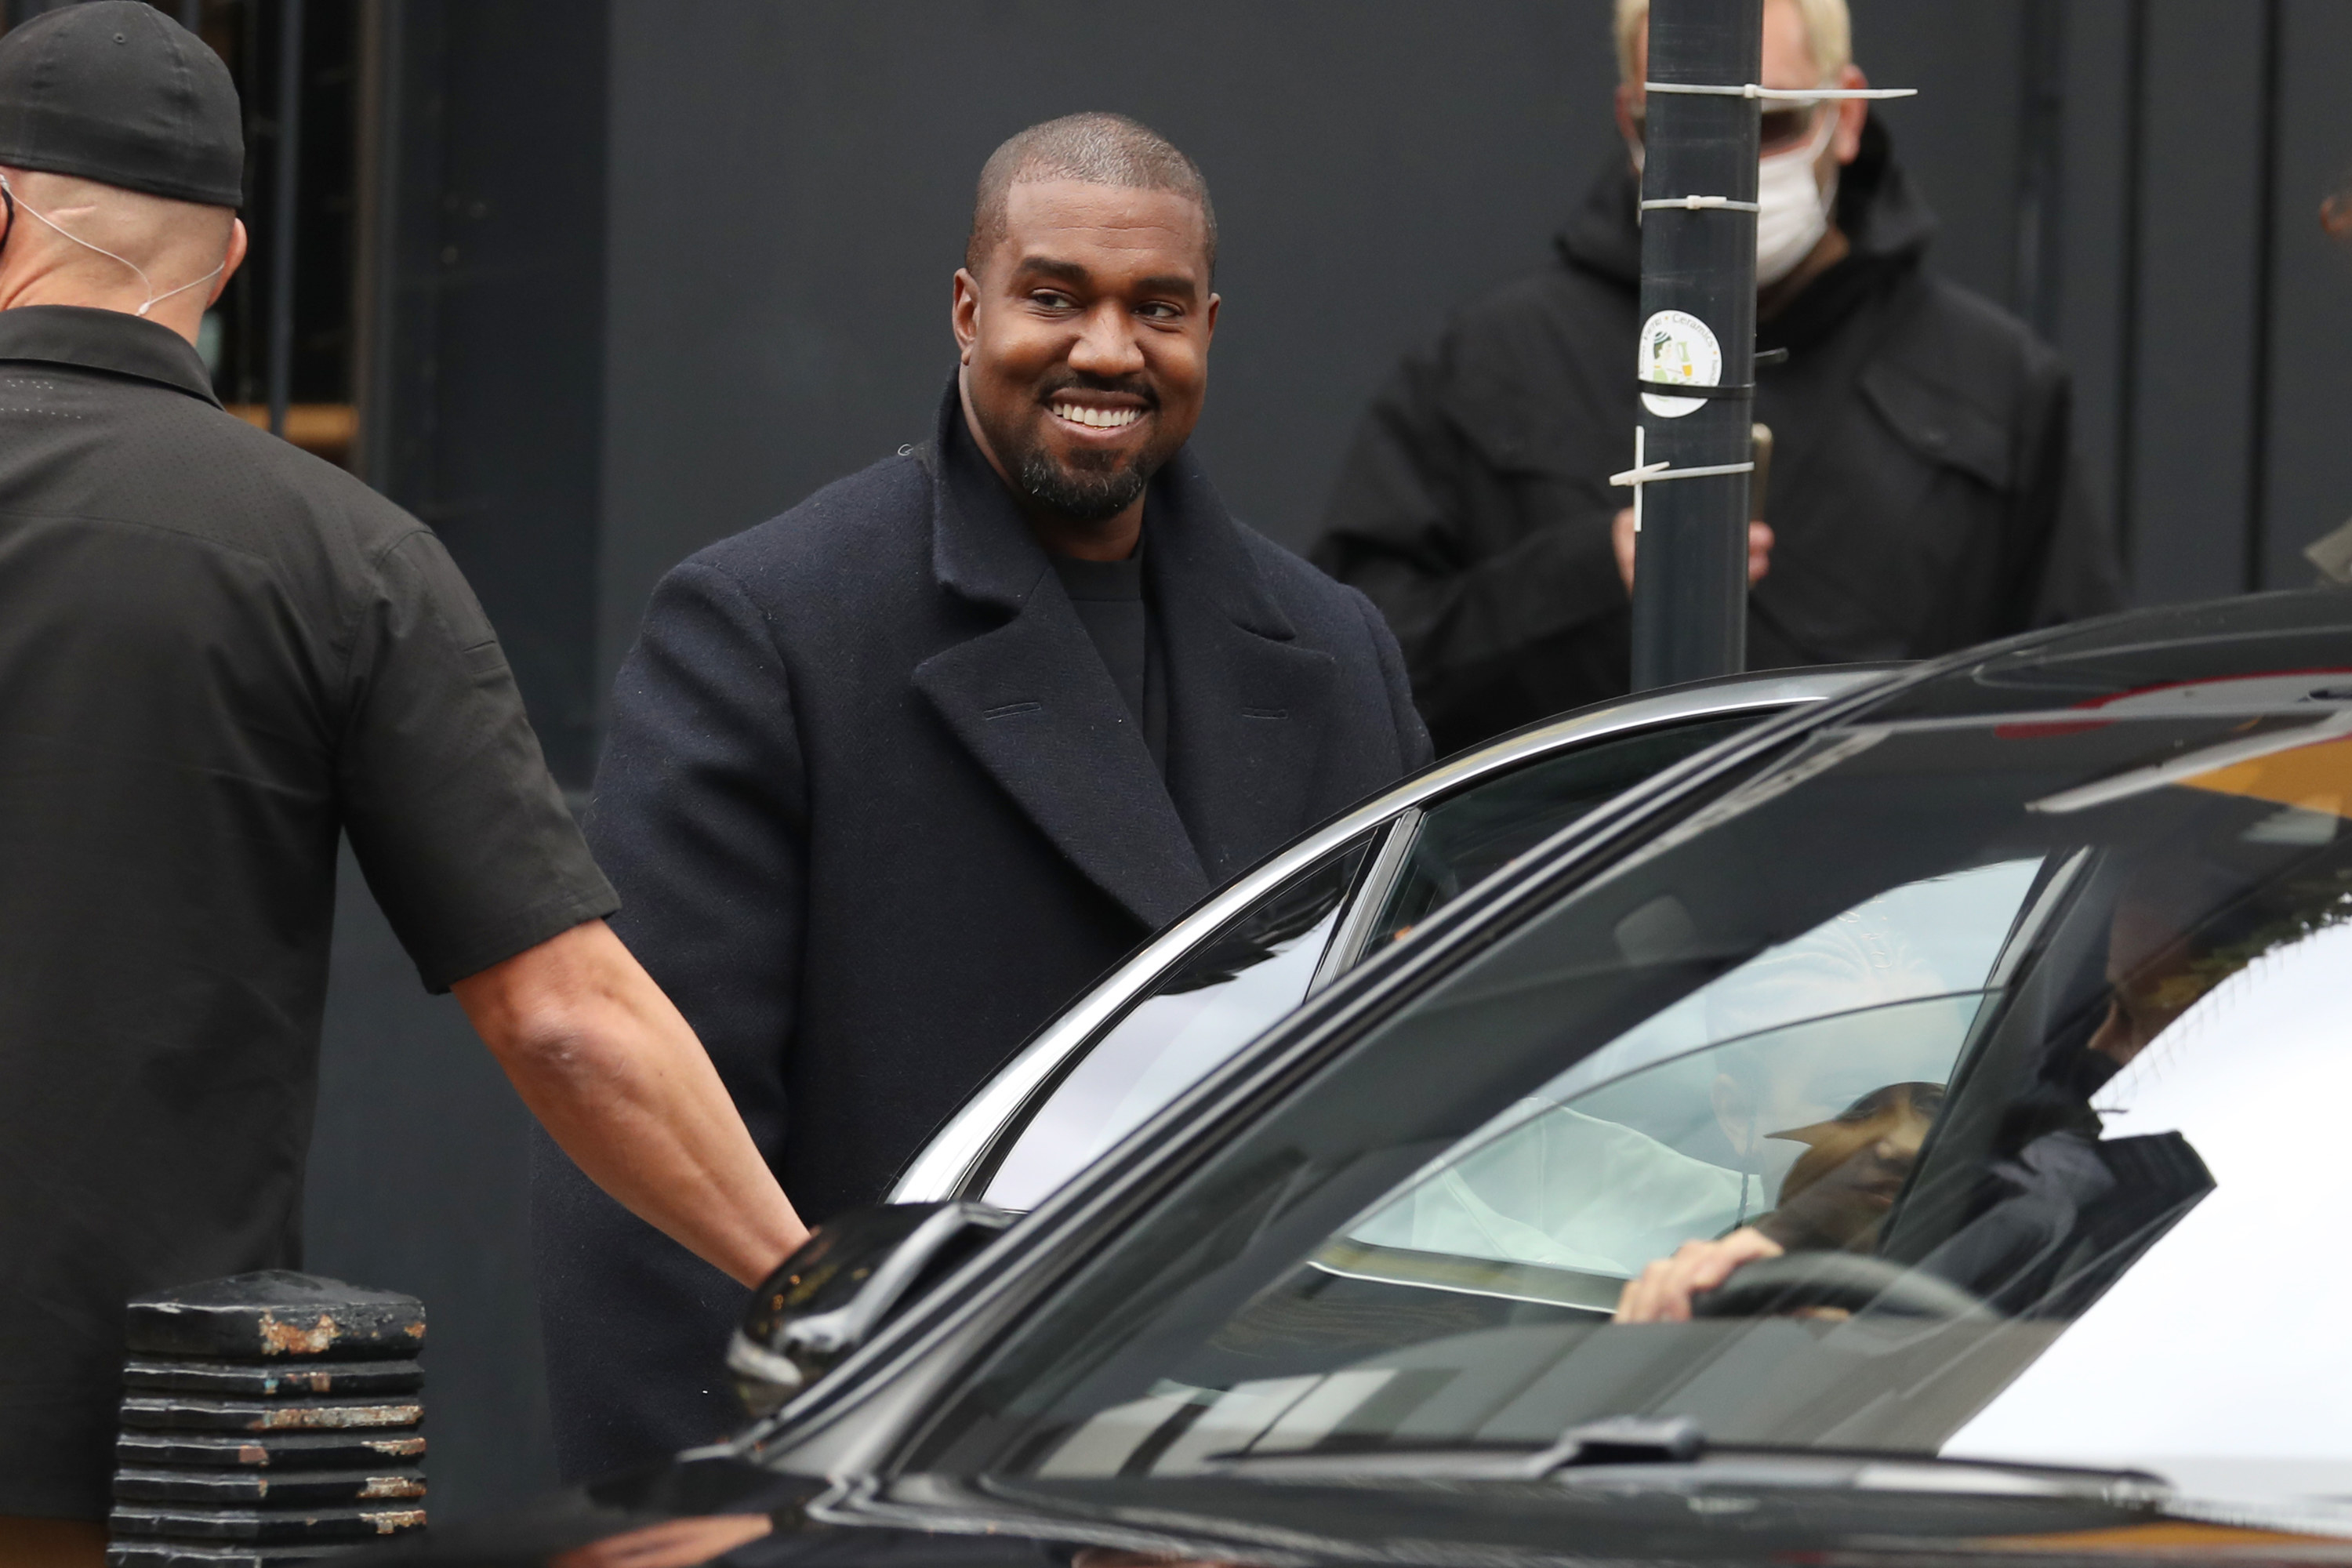 Kanye smiling by a car